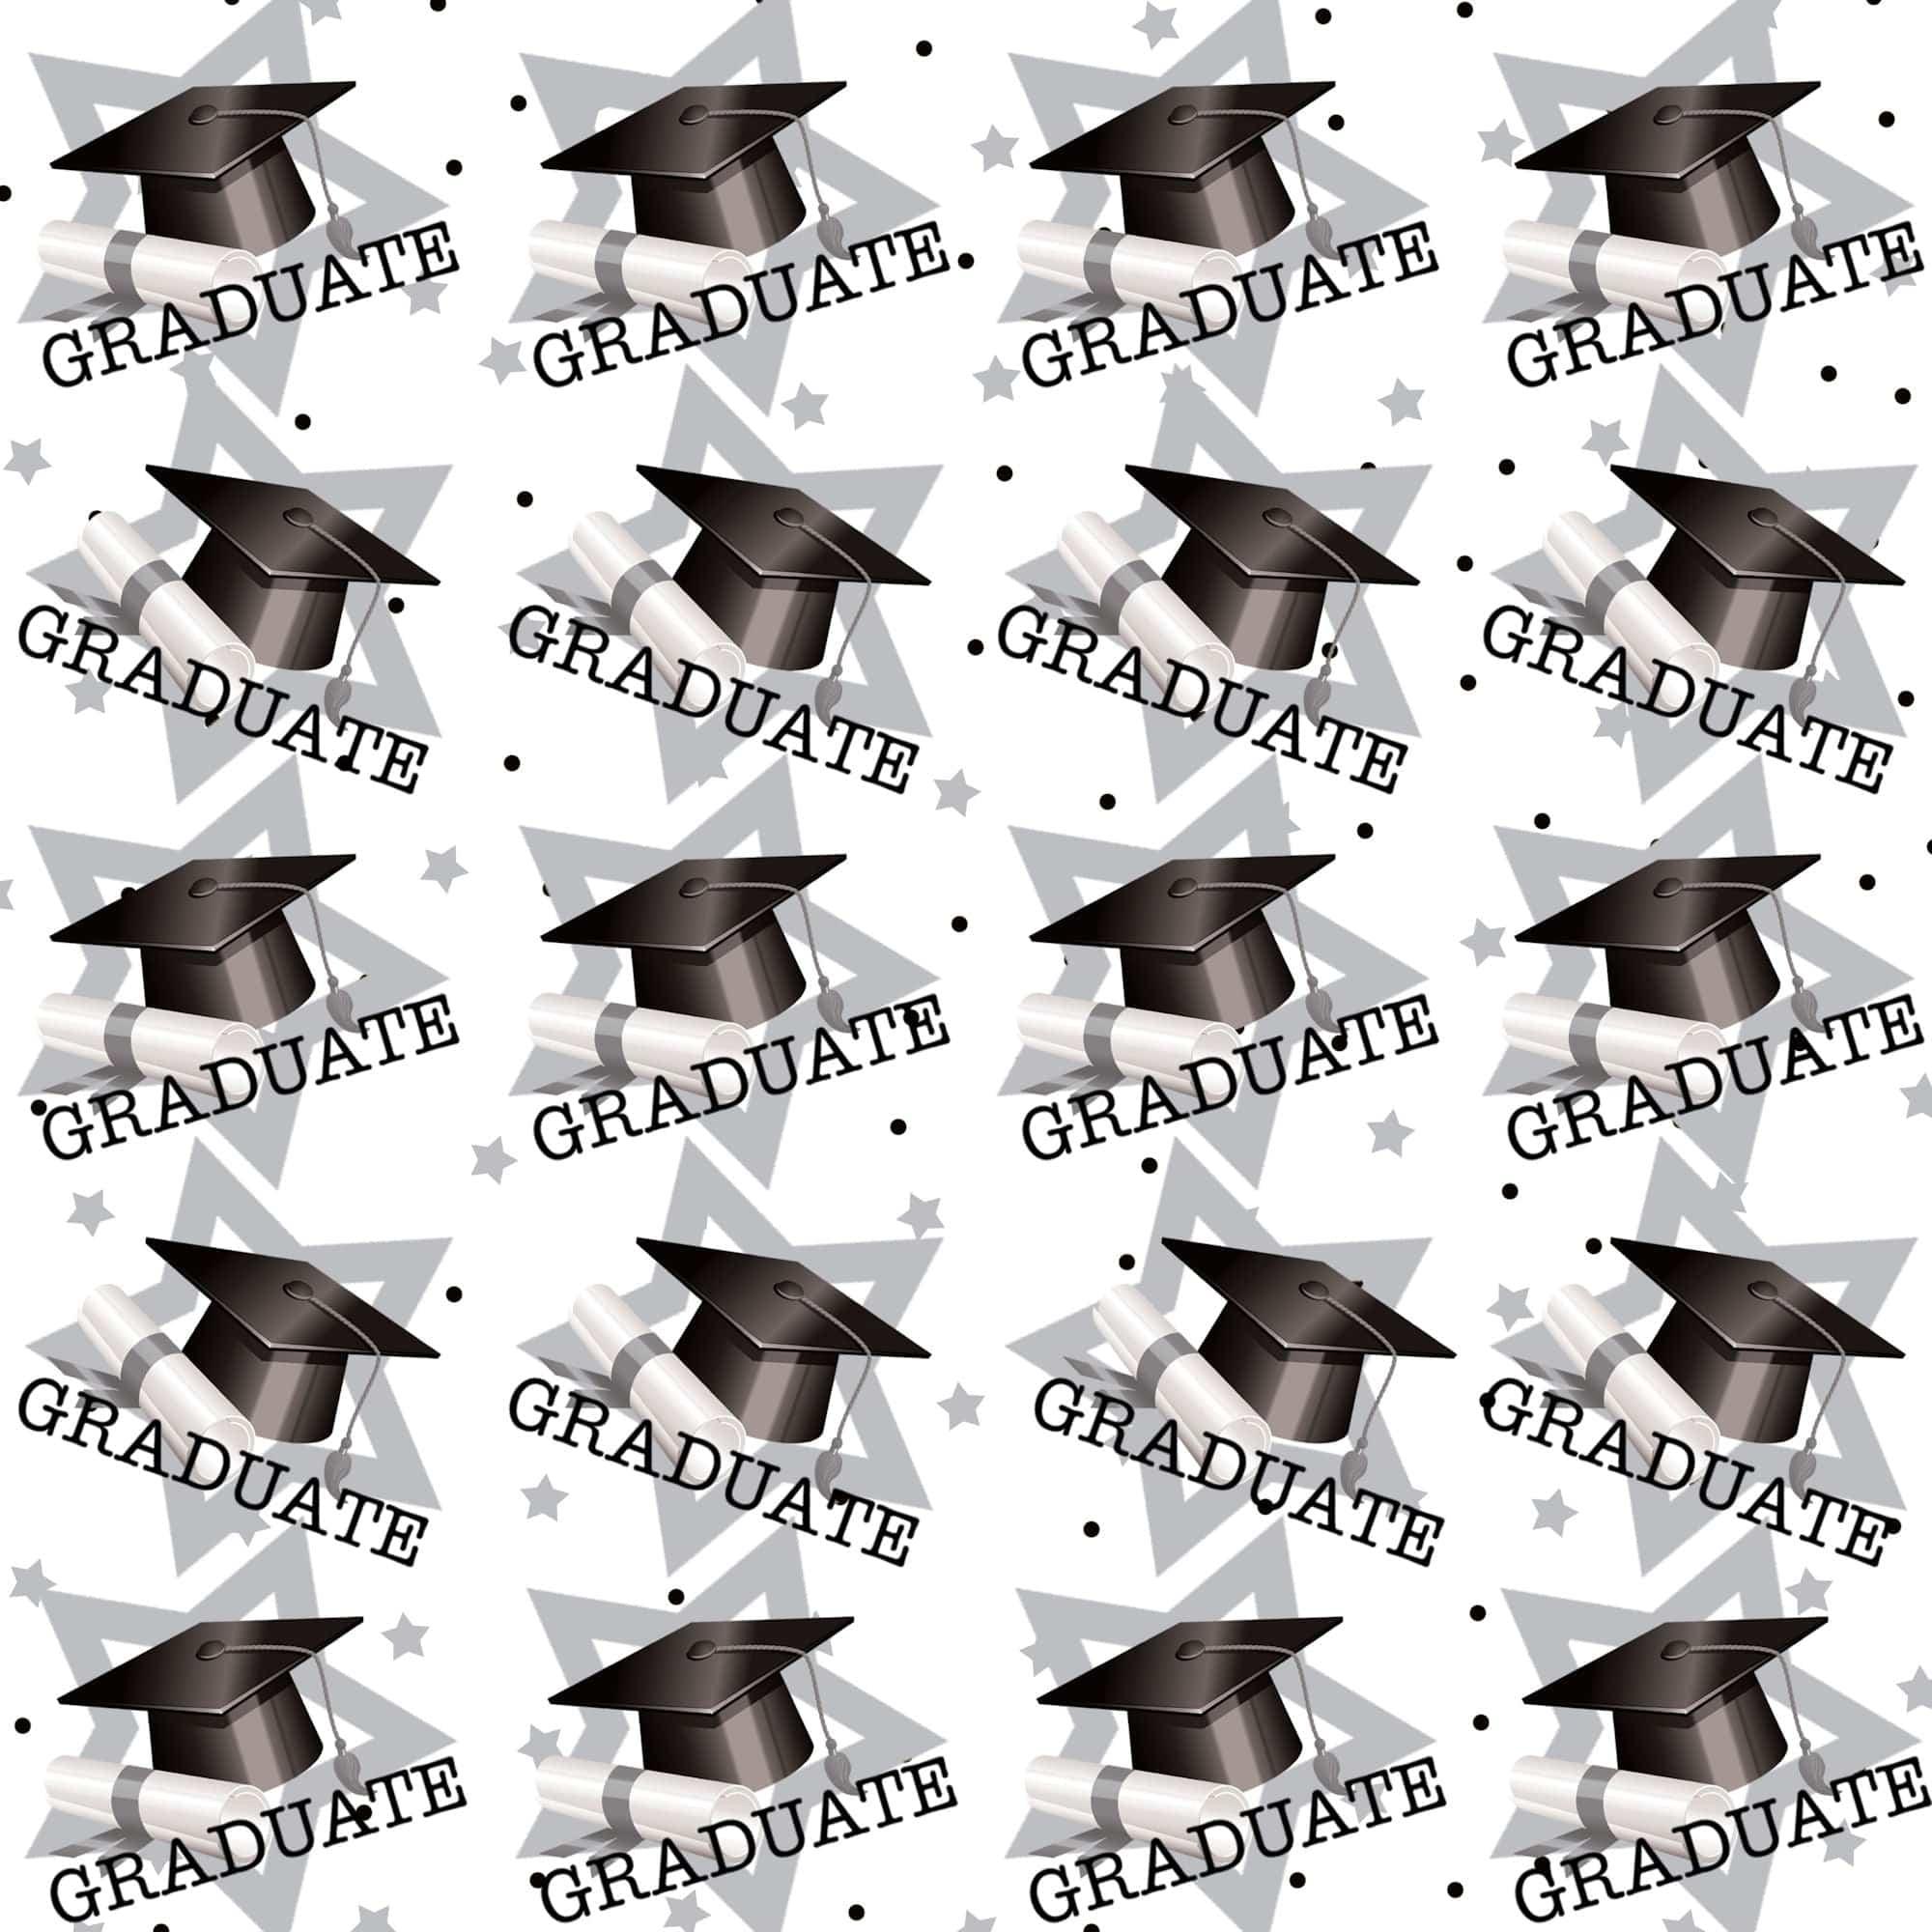 Graduate Collection Class of 2023 12 x 12 Double-Sided Scrapbook Paper by SSC Designs - Scrapbook Supply Companies